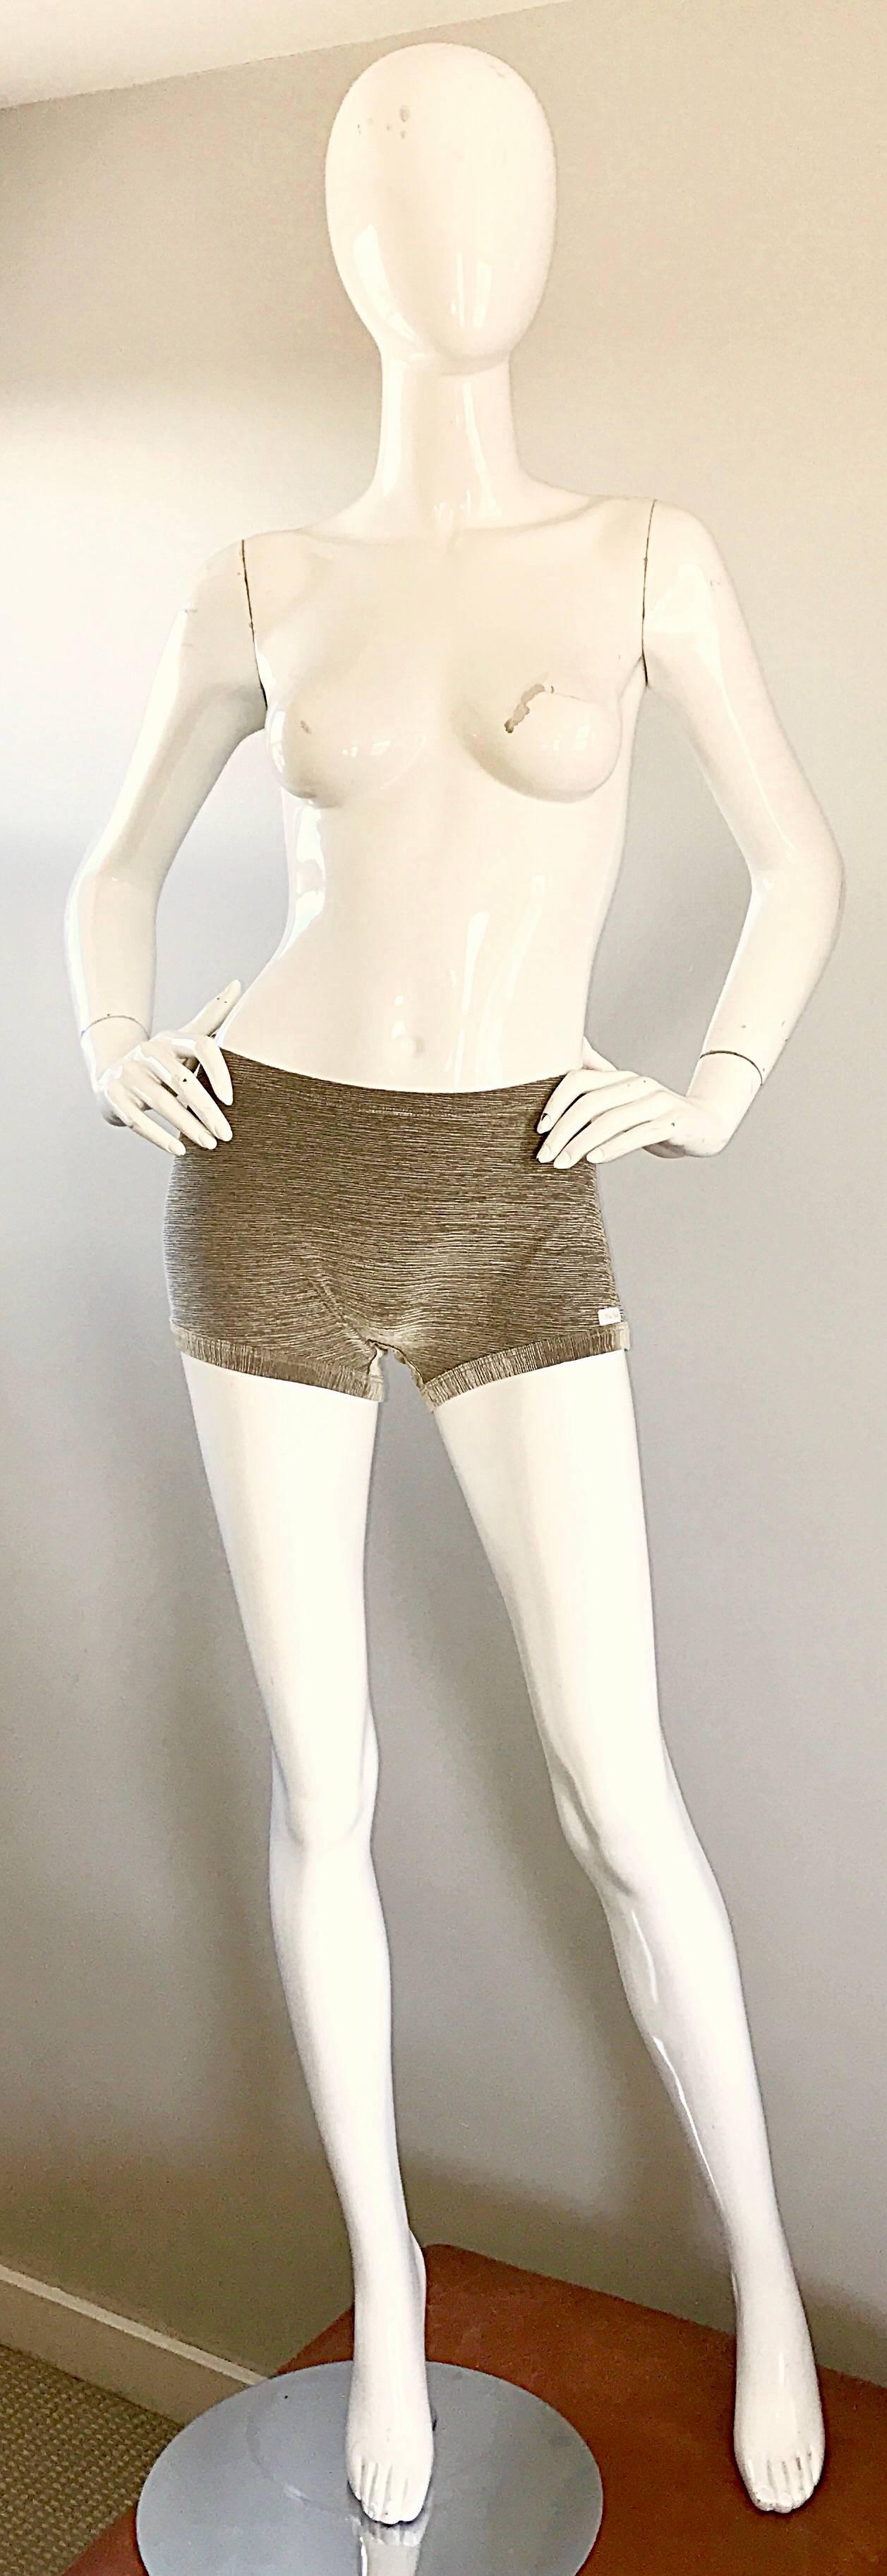 Sexy vintage 70s PIERRE CARDIN gold metallic disco hot pants! These shorts are simply amazing on! Italian made, with lots of stretch. Gold with thin black lines throughout. Pierre Cardin tag discreetly attached at left side leg. In great unworn